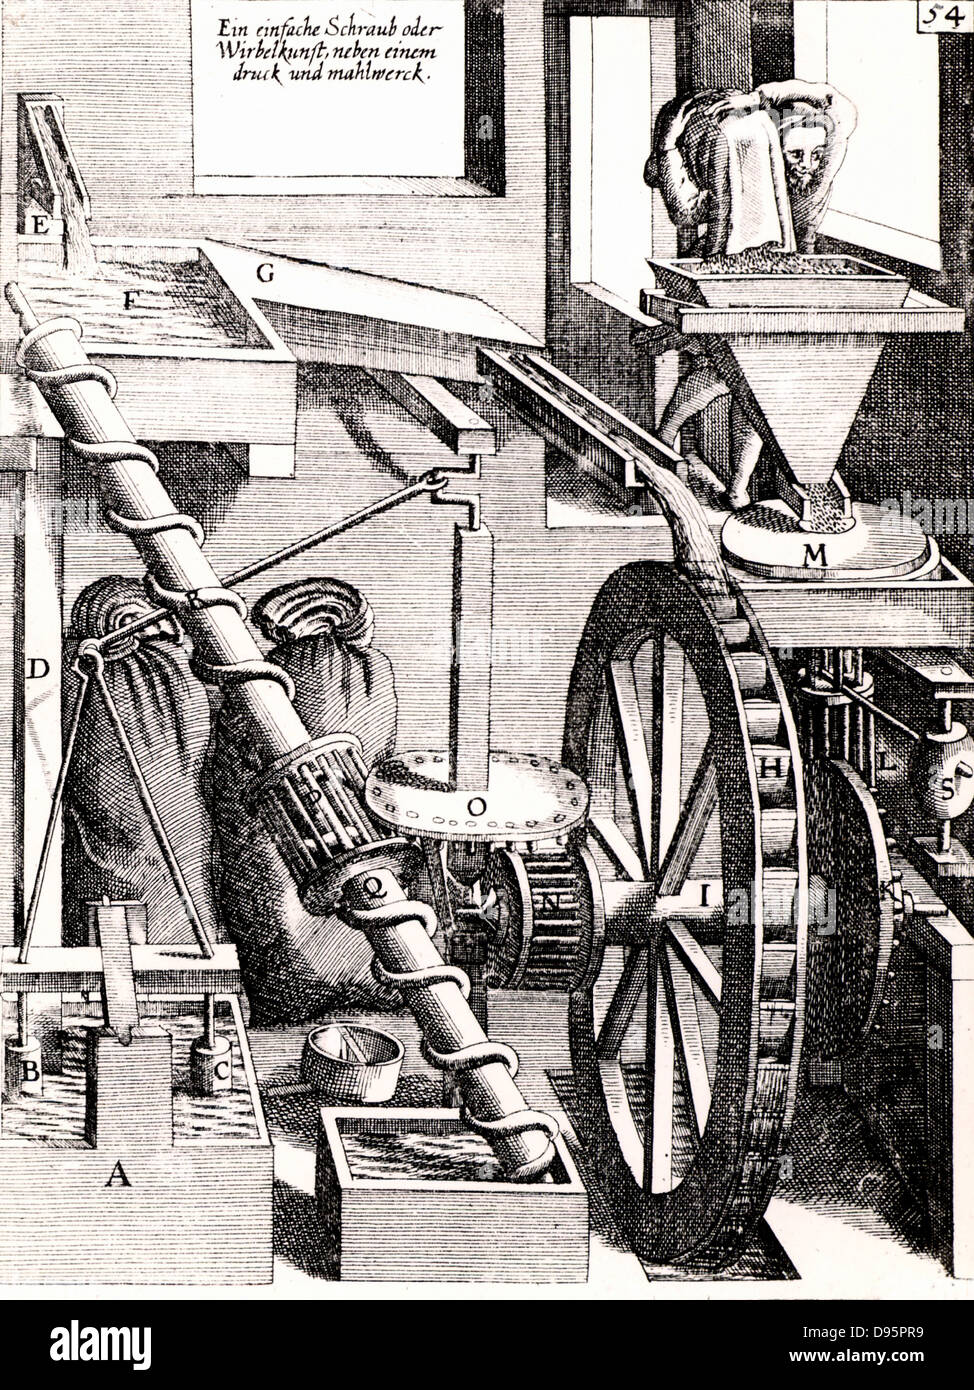 Perpetual motion:  A grinding mill M, driven by a water wheel H, which is itself driven y waer from upper cistern F. In addition to driving the mill, the whater wheel also drives the water up again to the cistern by rotating the Archimedean screw Q, and the pumps B and C.  Engraving from 'Theatrum Machinarum Novum' by George Andreas Bockler (Nuremberg, 1673). Stock Photo